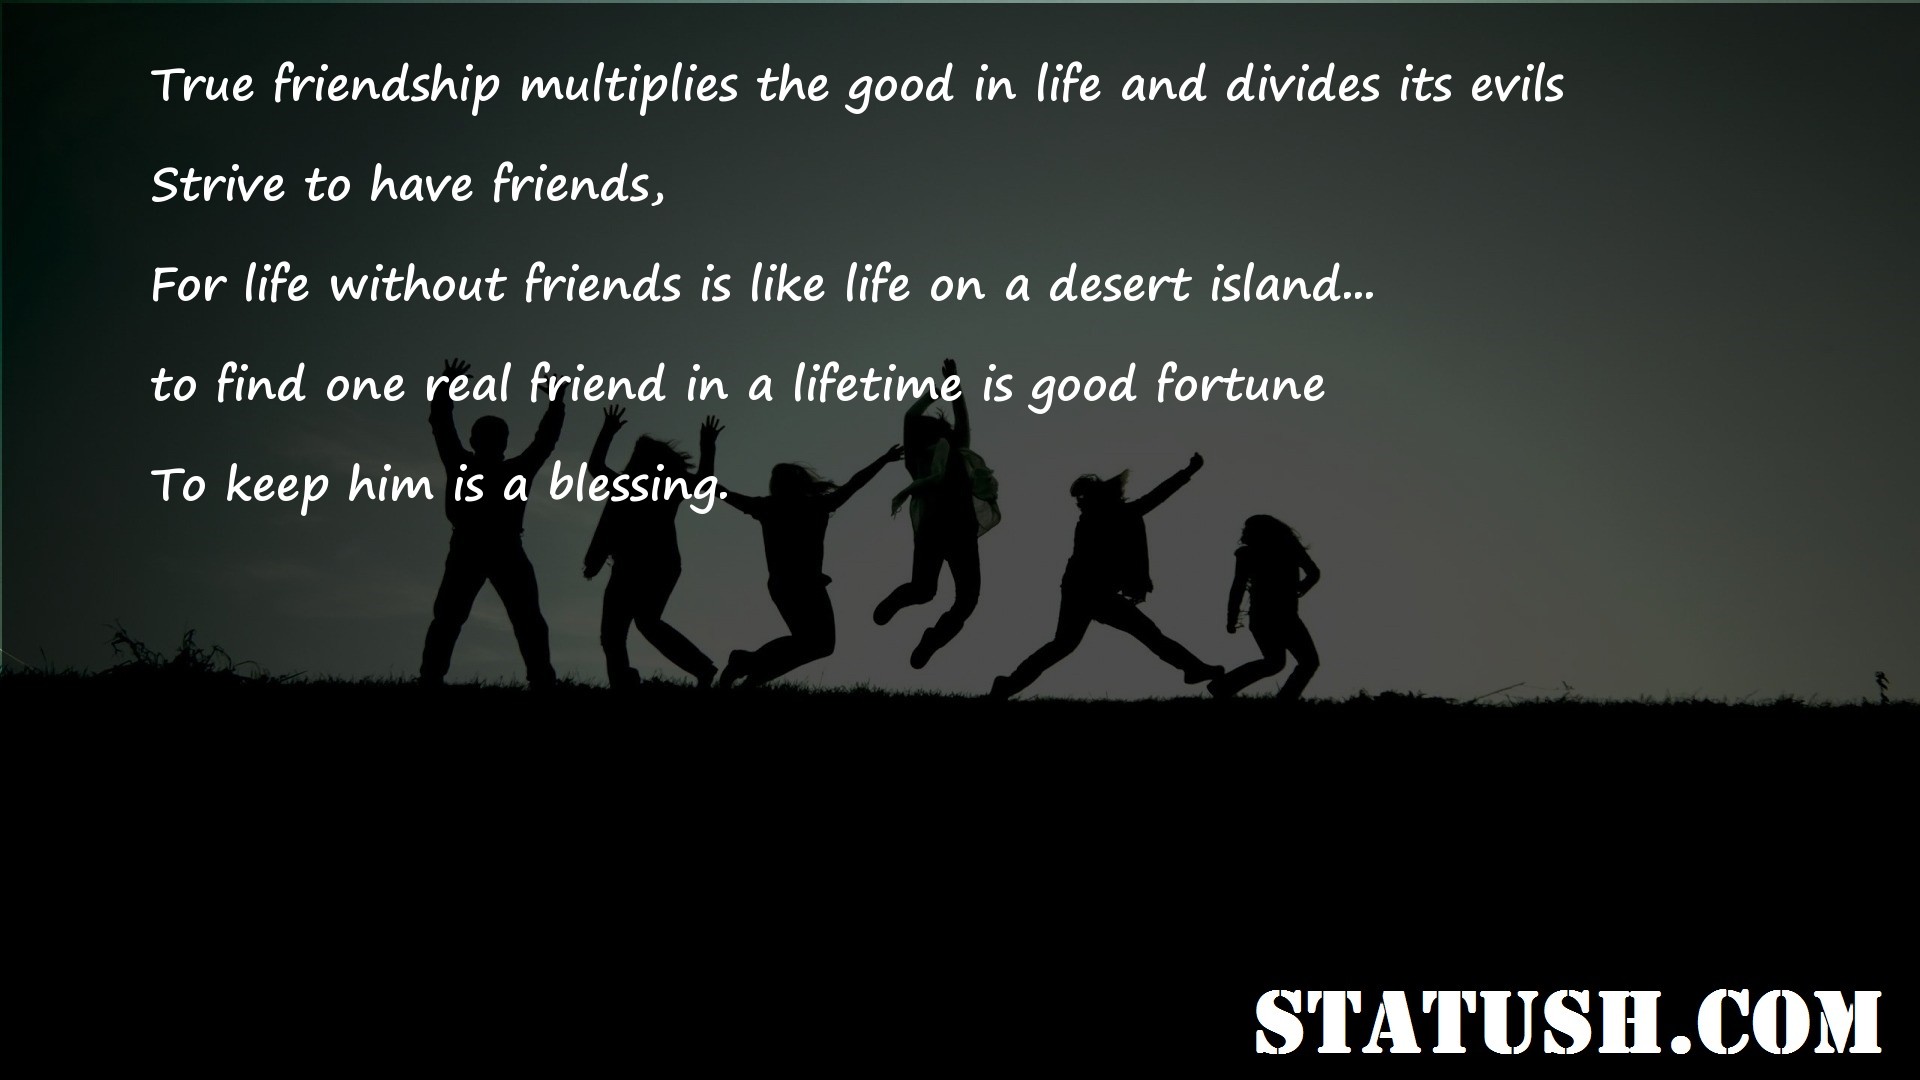 True friendship multiplies the good in life and divides its evils